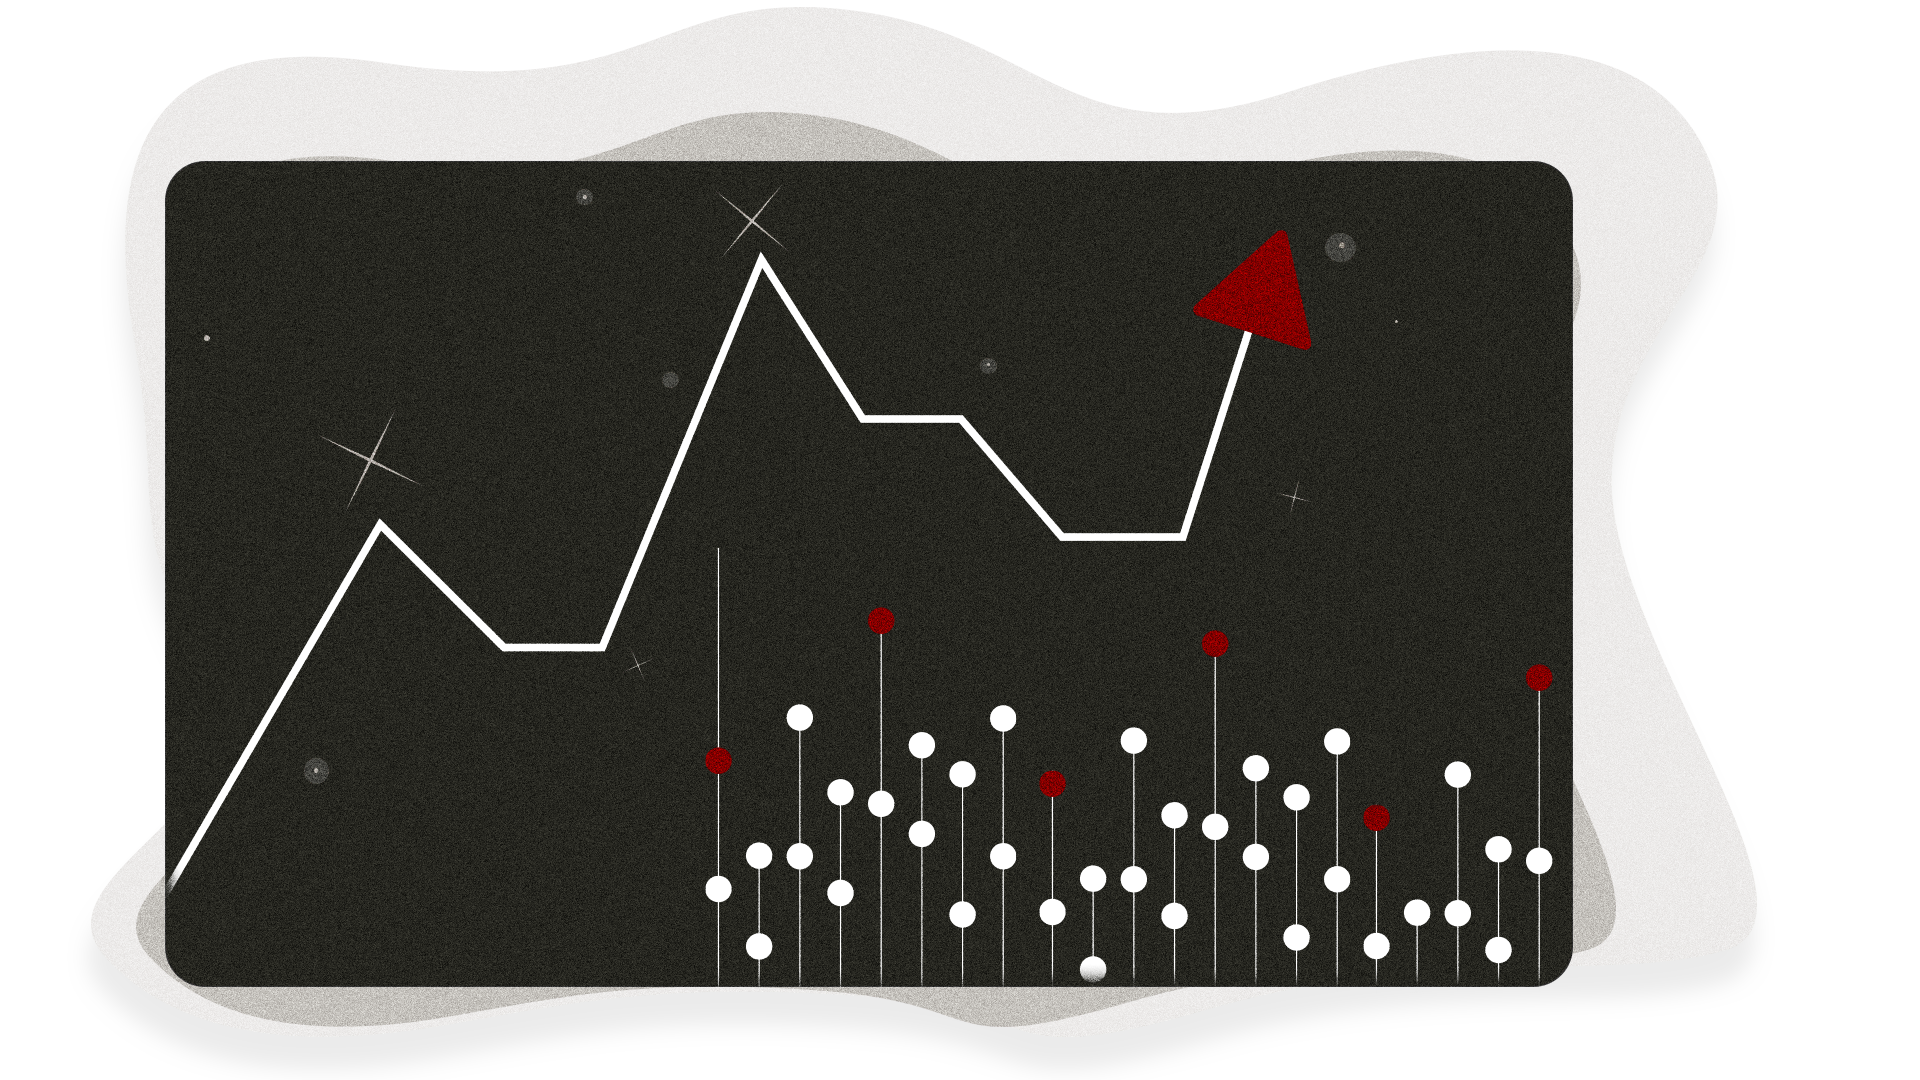 Abstract image with graph elements, including an upward trending arrow and columns of data points